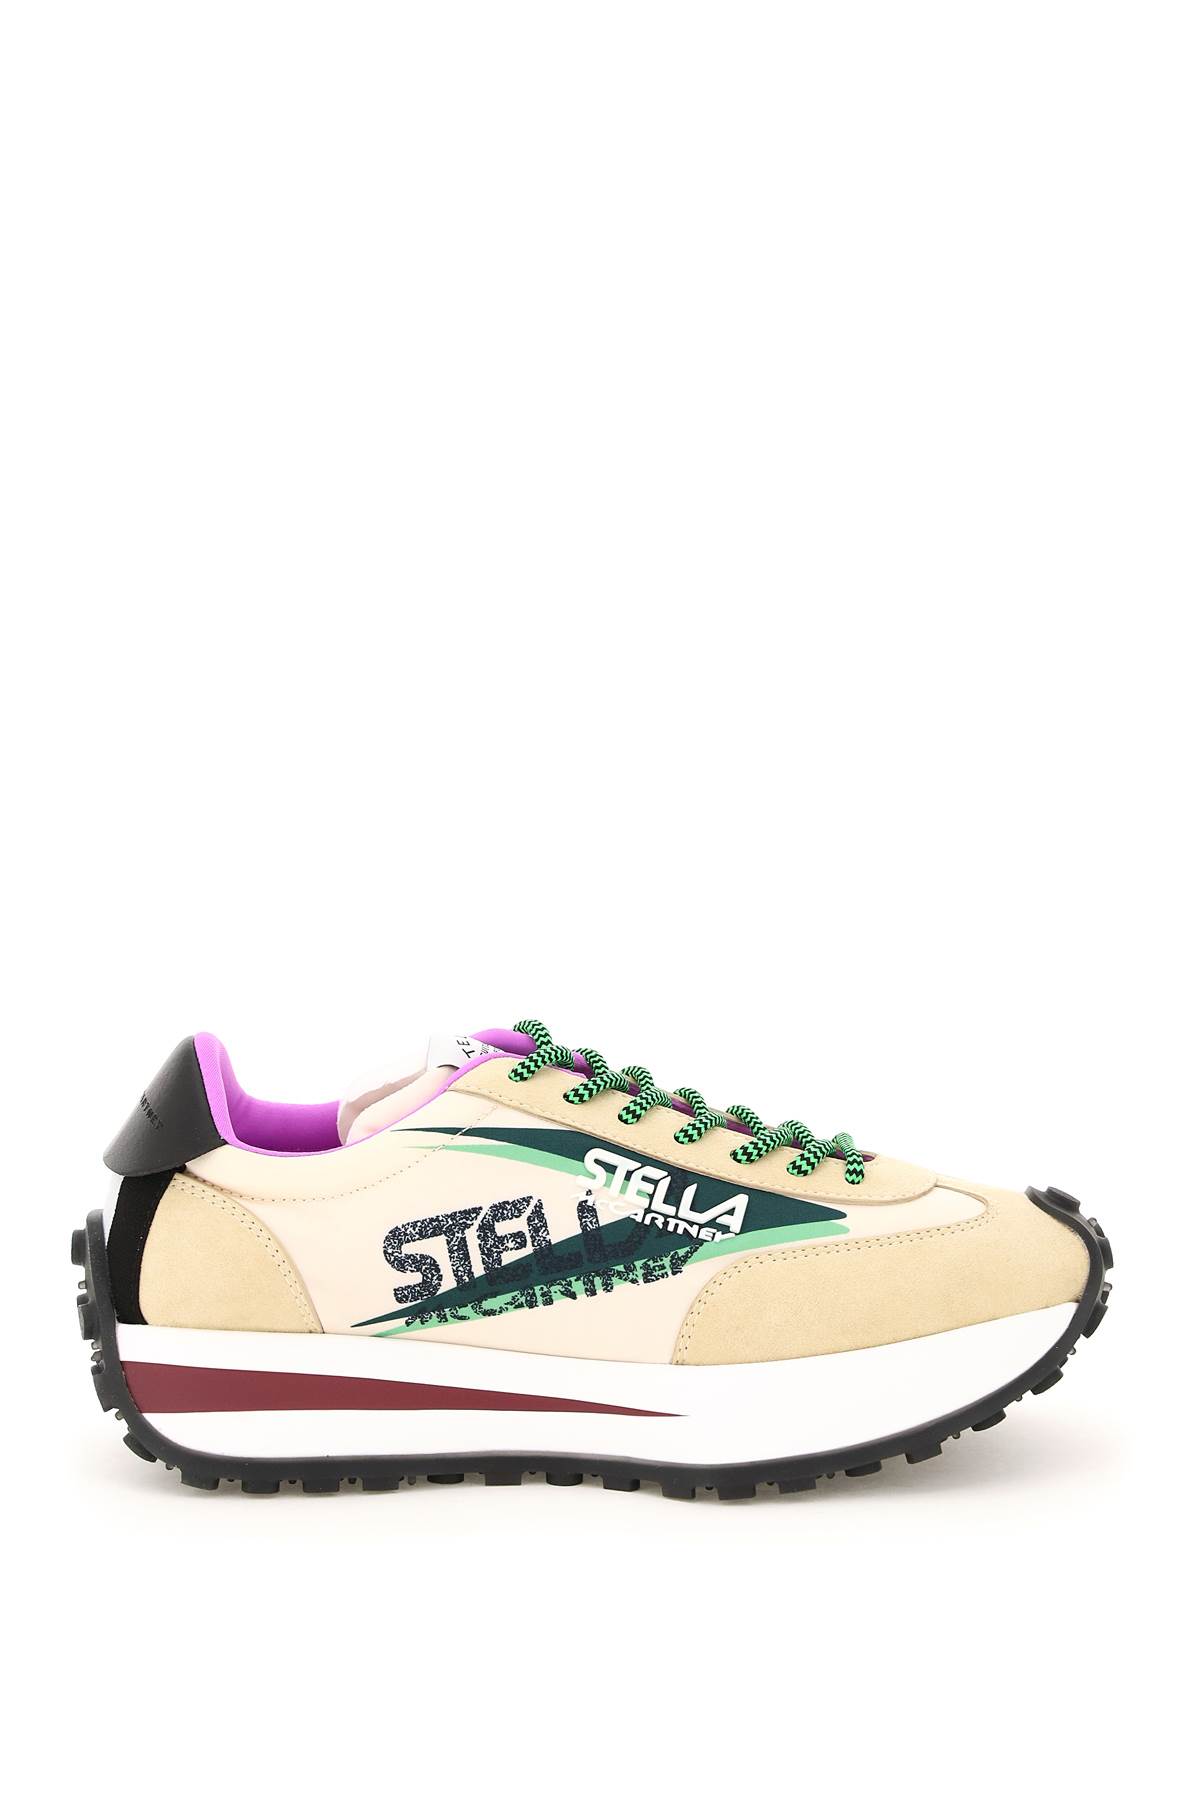 Stella McCartney Recycled Polyester Reclypse Sneakers